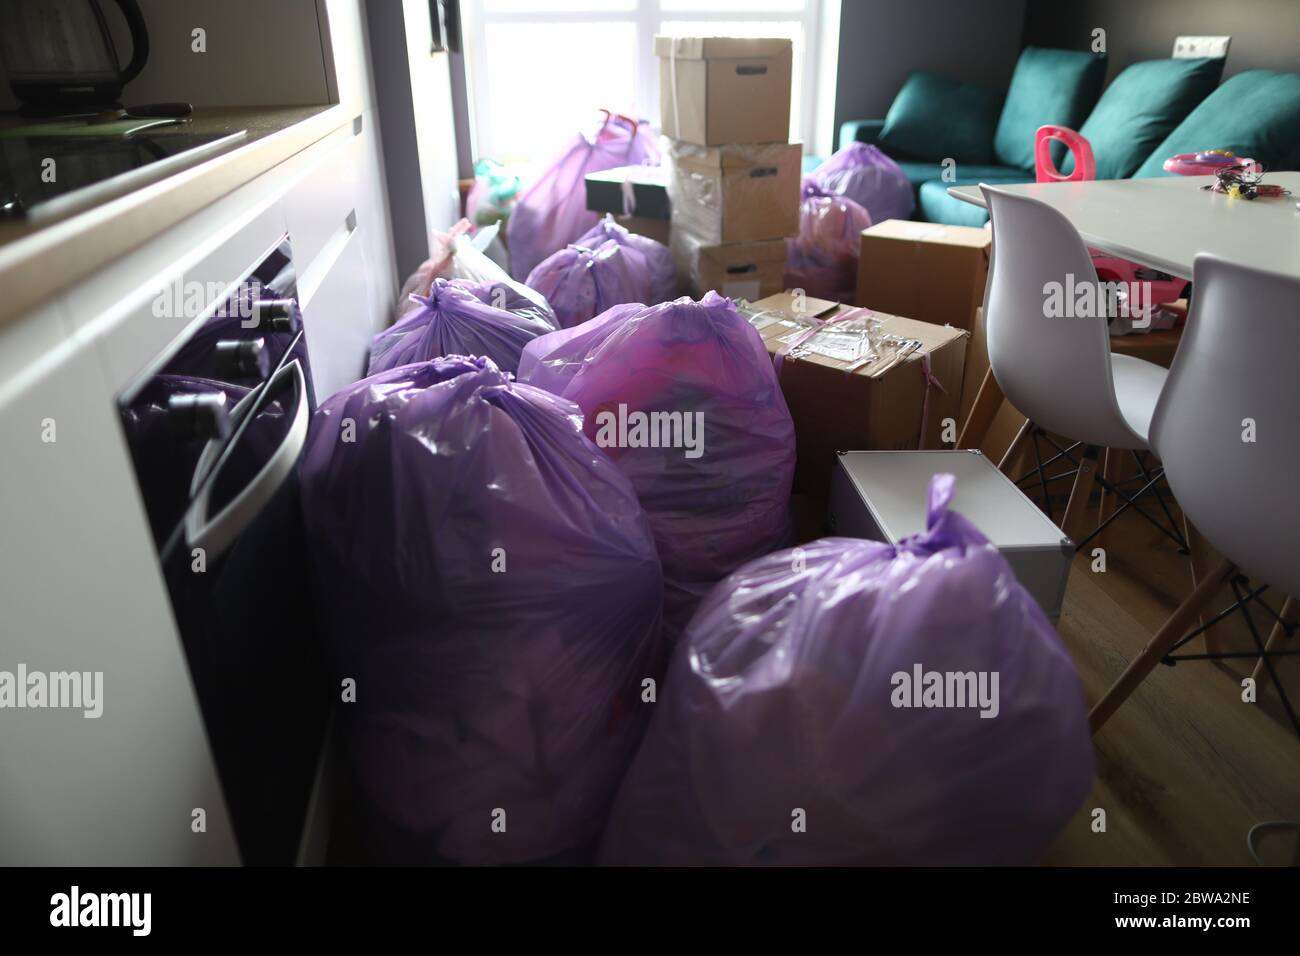 Kitchen is full garbage bags and cardboard boxes Stock Photo